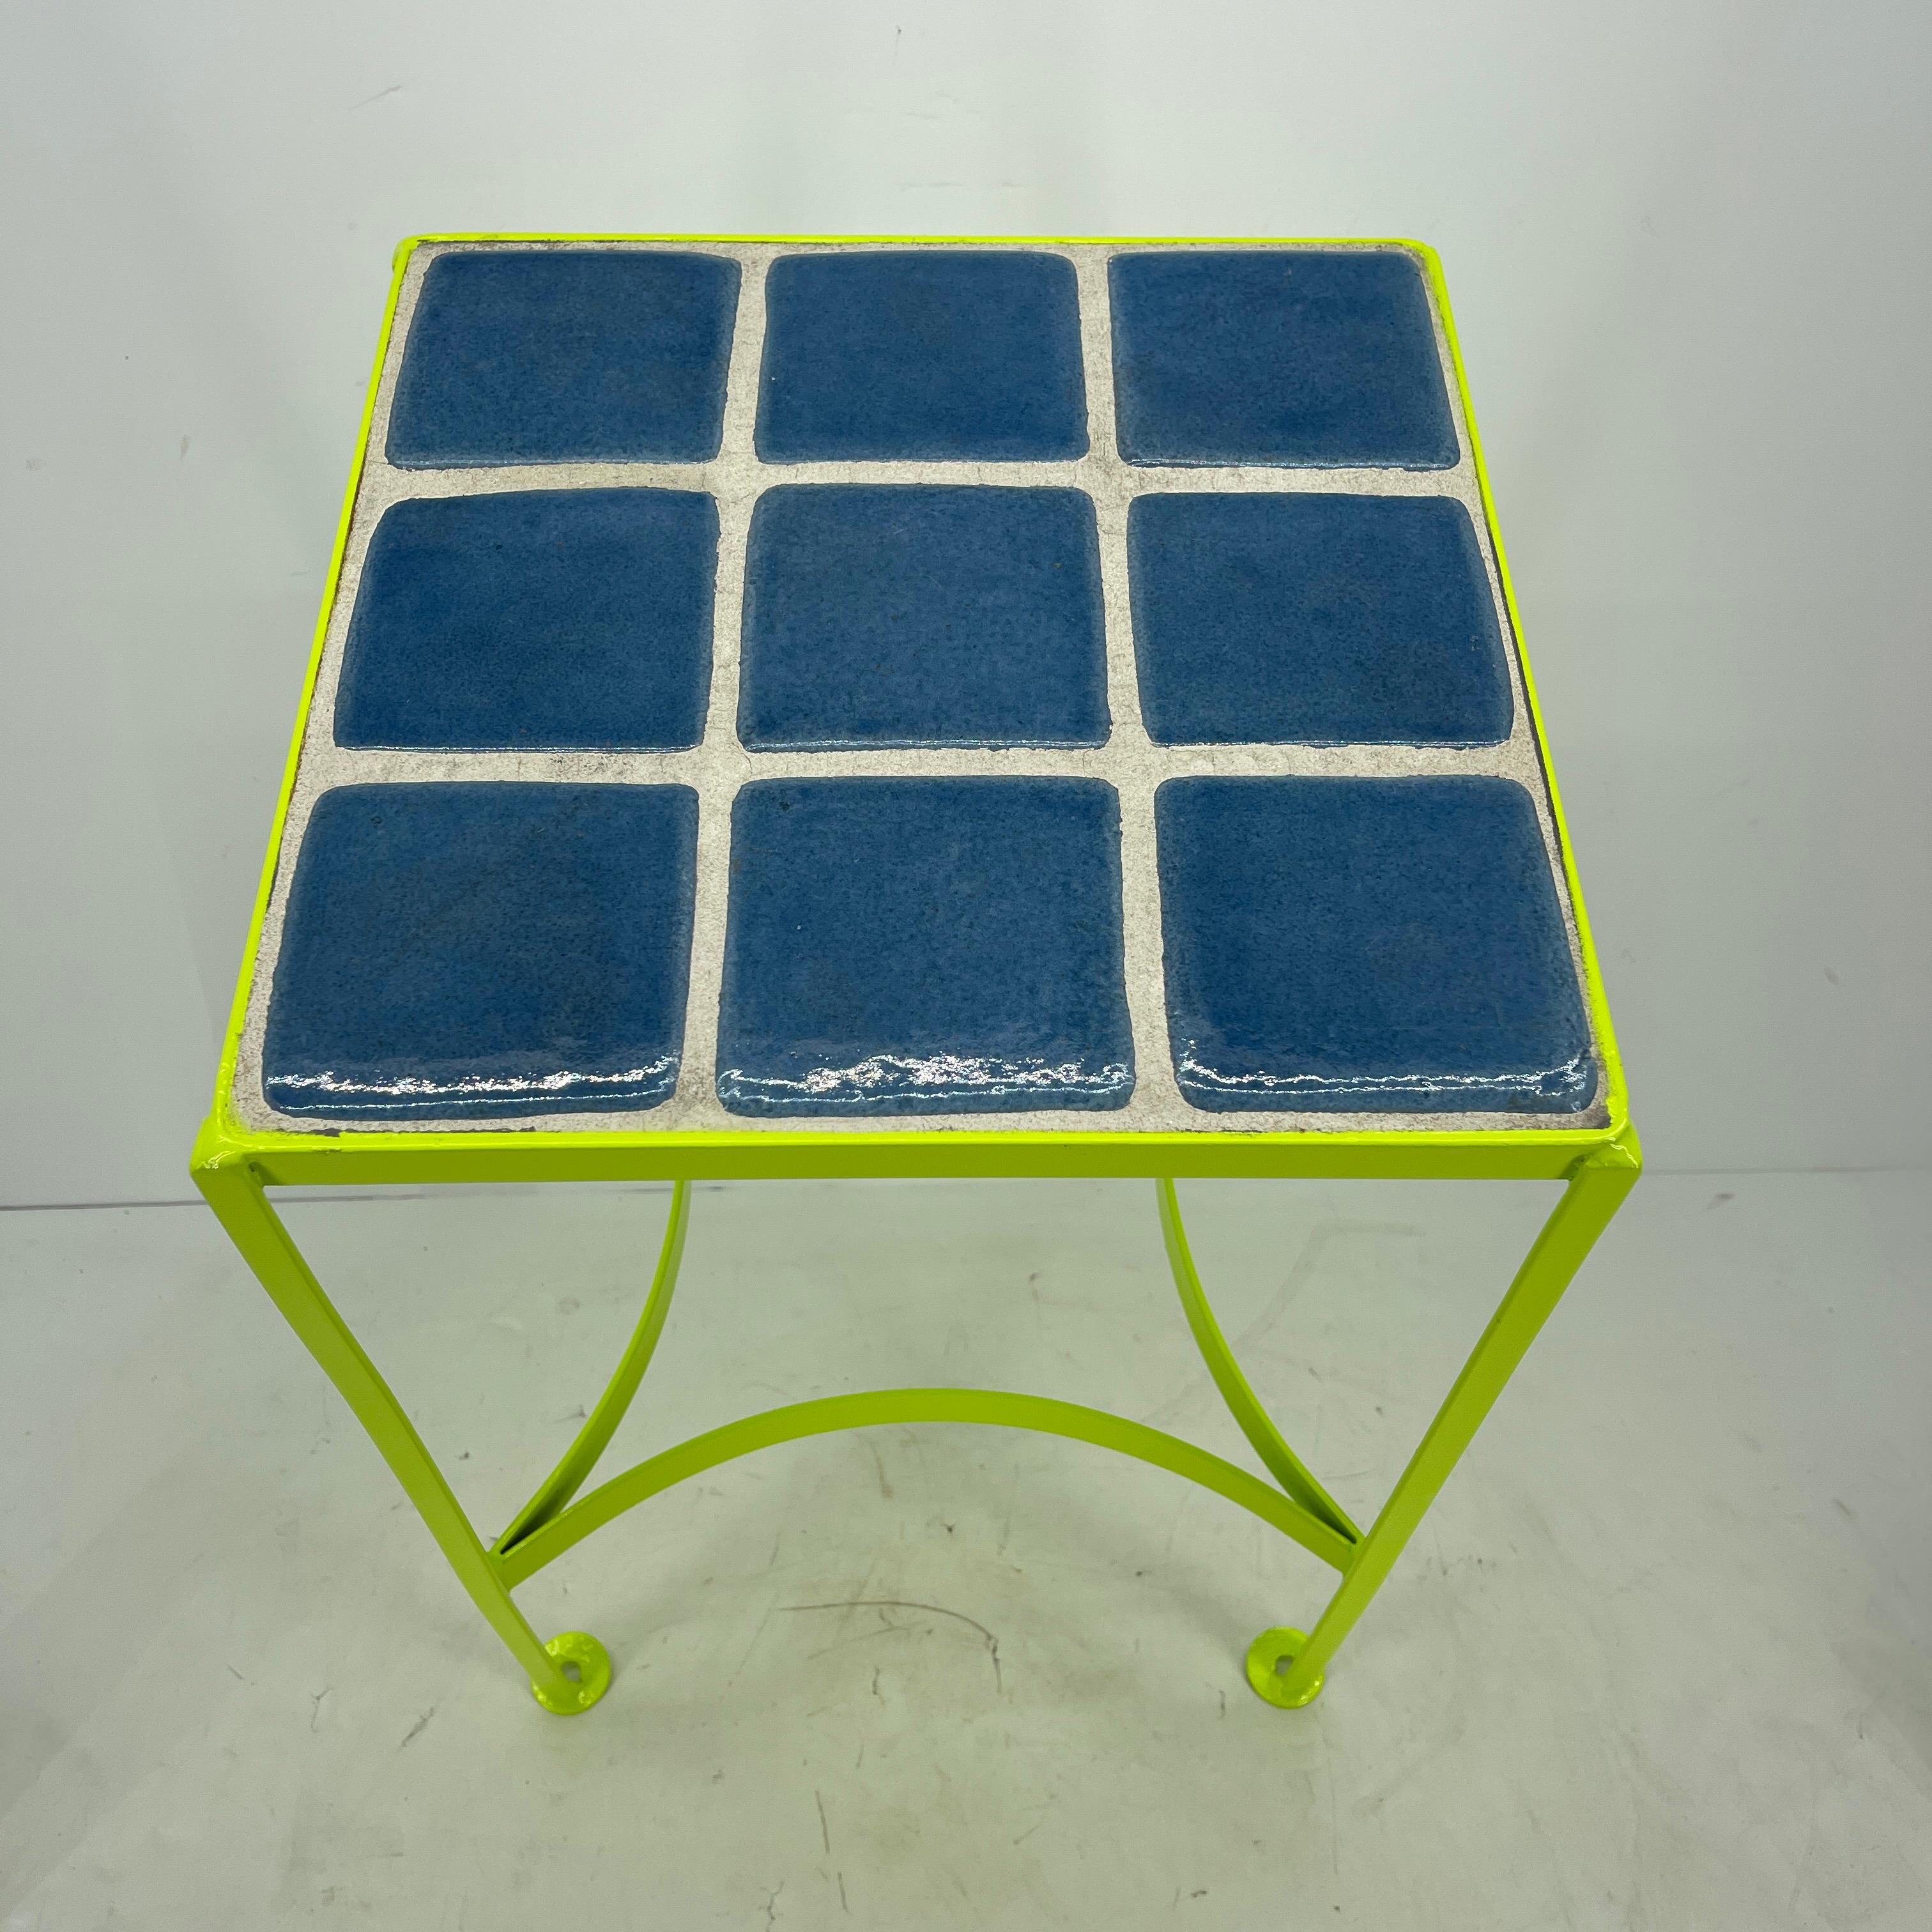 Glazed Small Square Tile Top Metal Side or End Table